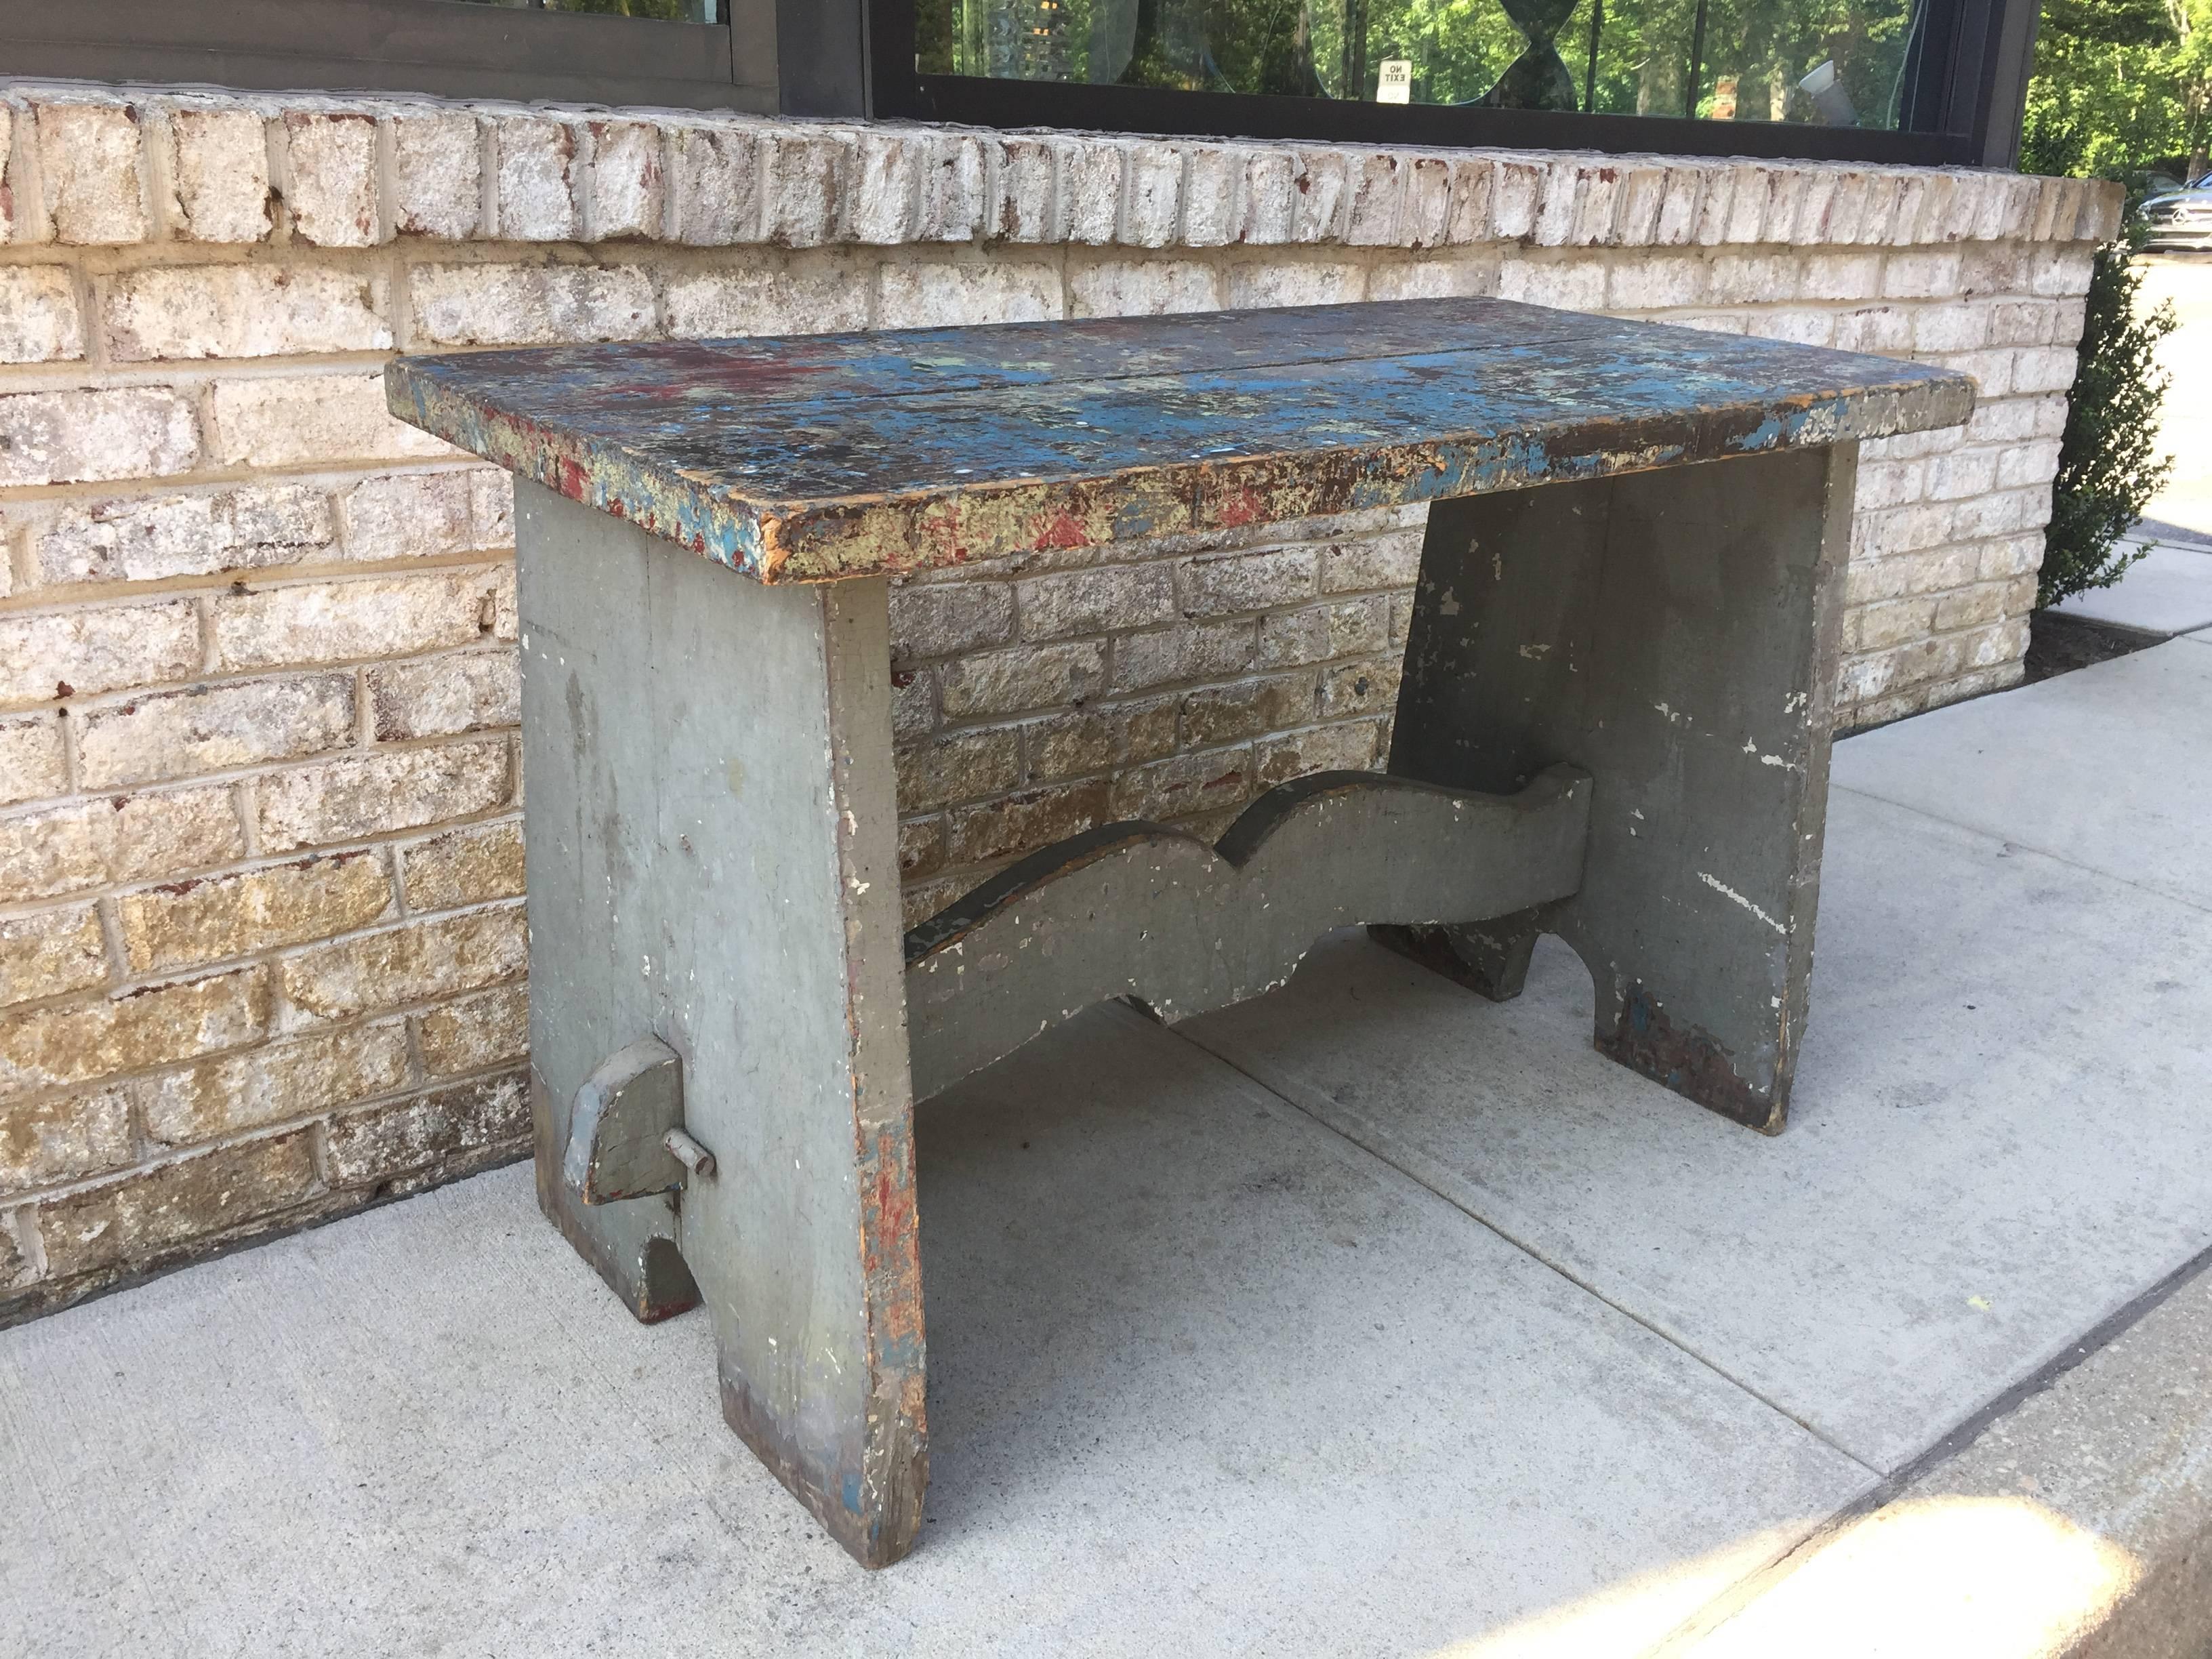 Beautifully distressed and patinated in hues of greys, blues and reds; after years of art making and artistic work this magnificent antique Dutch working art studio table or console will make that special place in your decor.